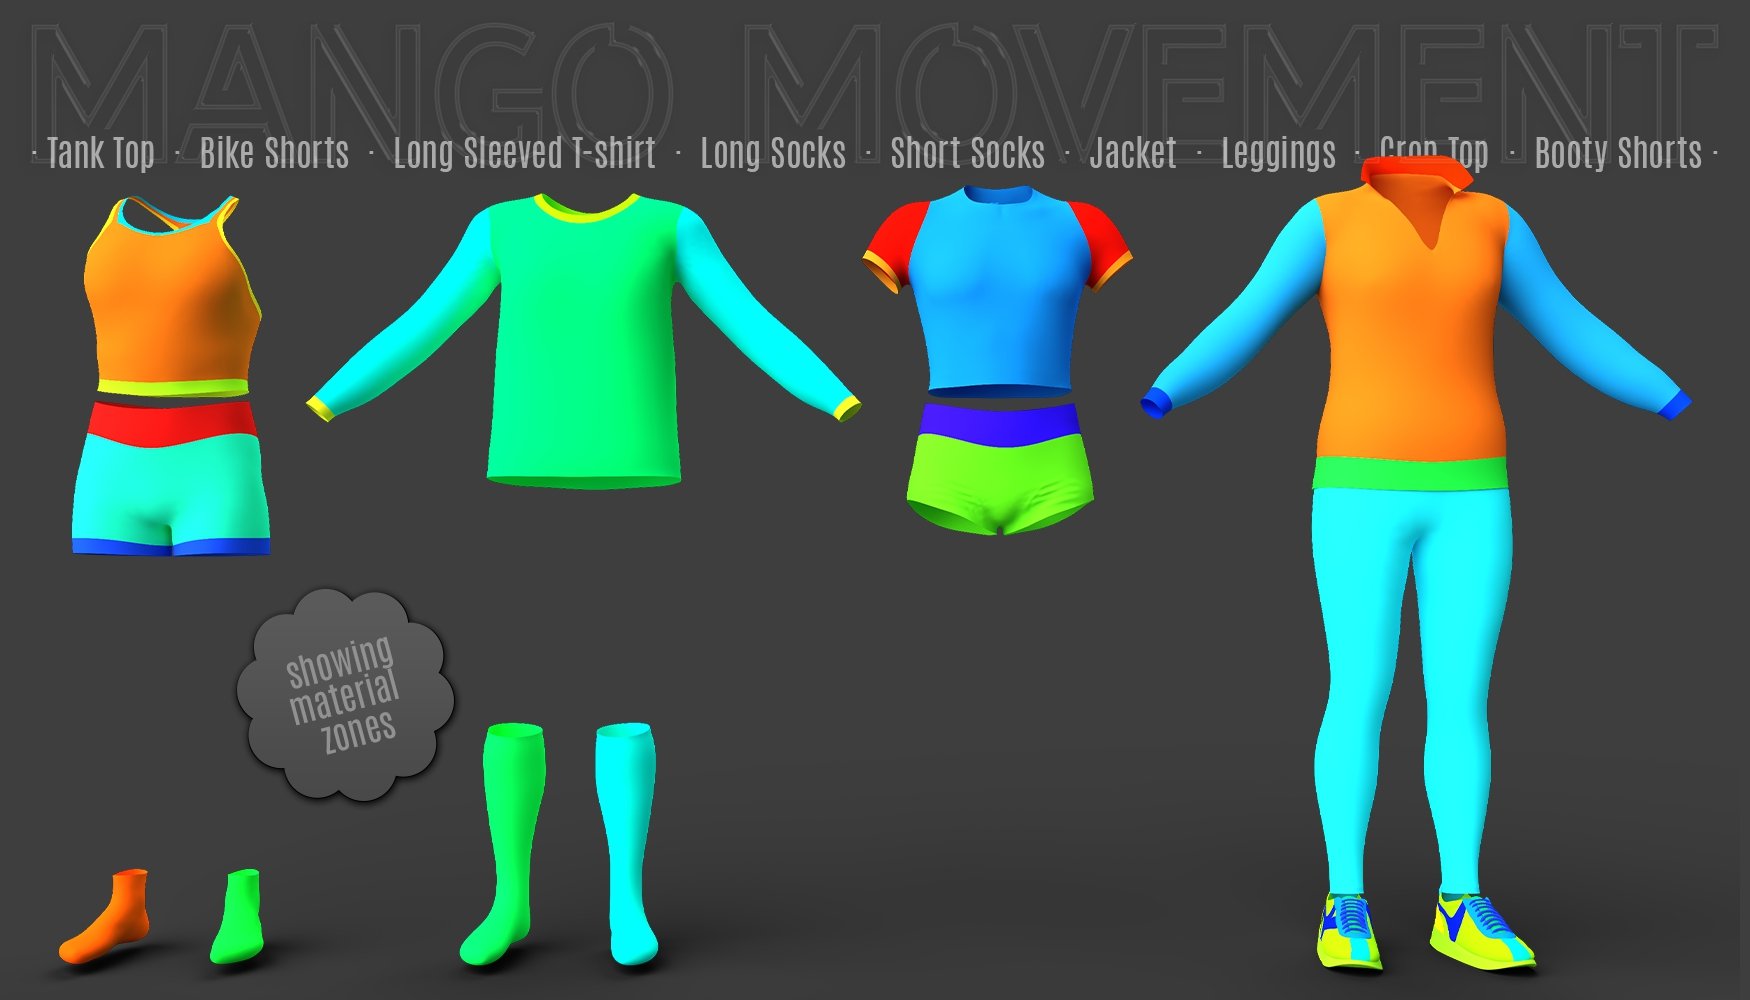 Mango Movement Collection for Genesis 9 by: Lyoness, 3D Models by Daz 3D